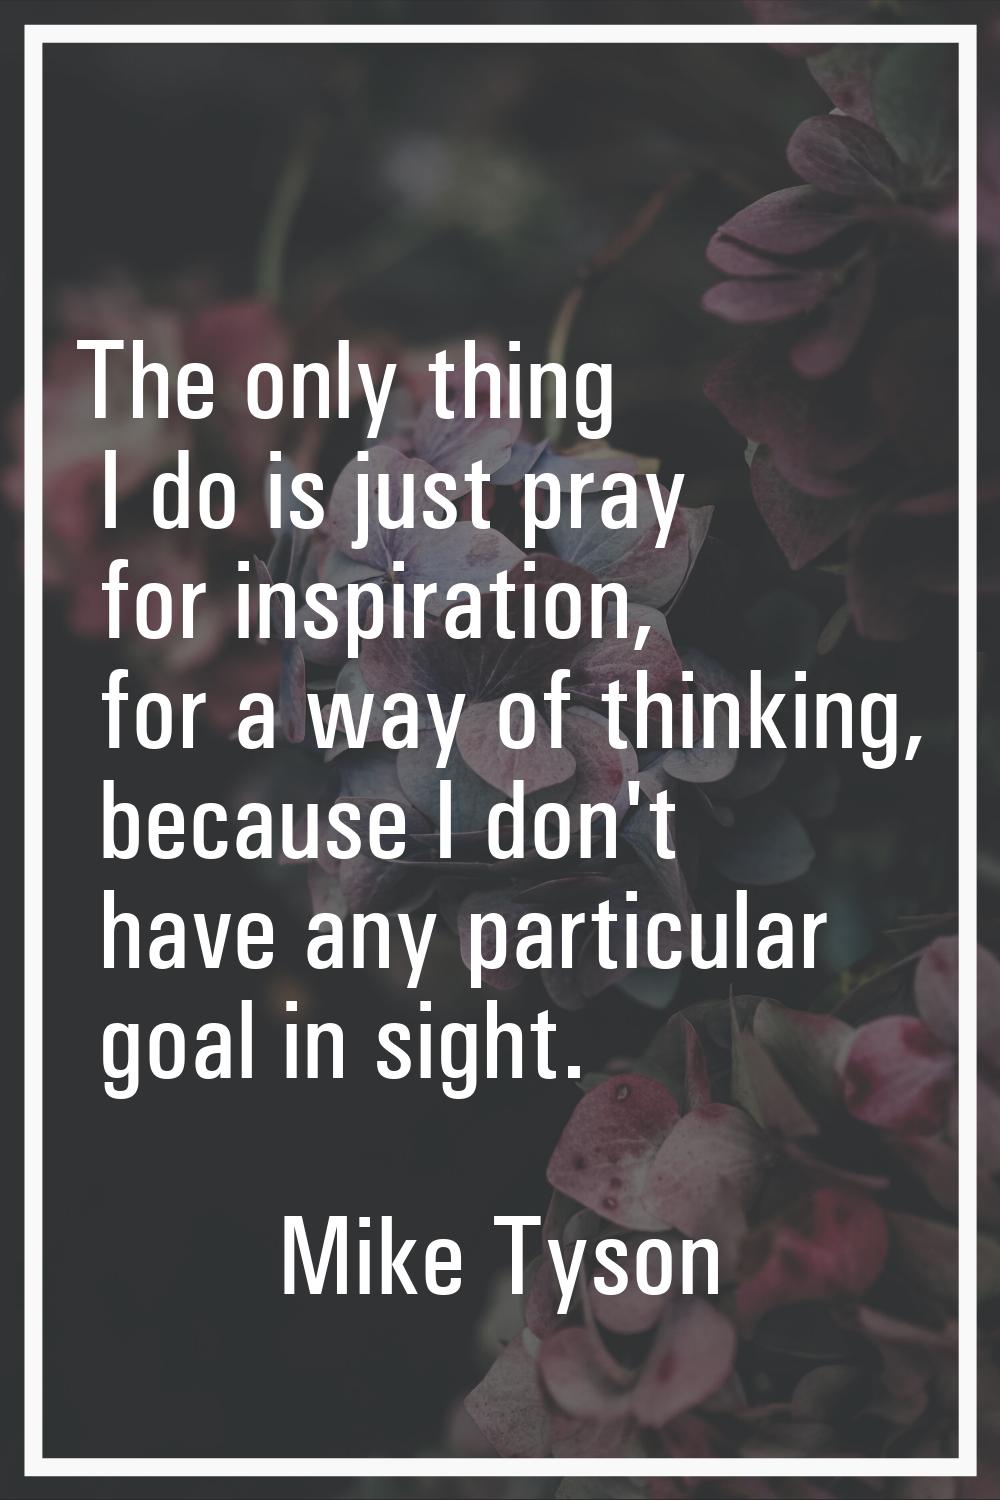 The only thing I do is just pray for inspiration, for a way of thinking, because I don't have any p